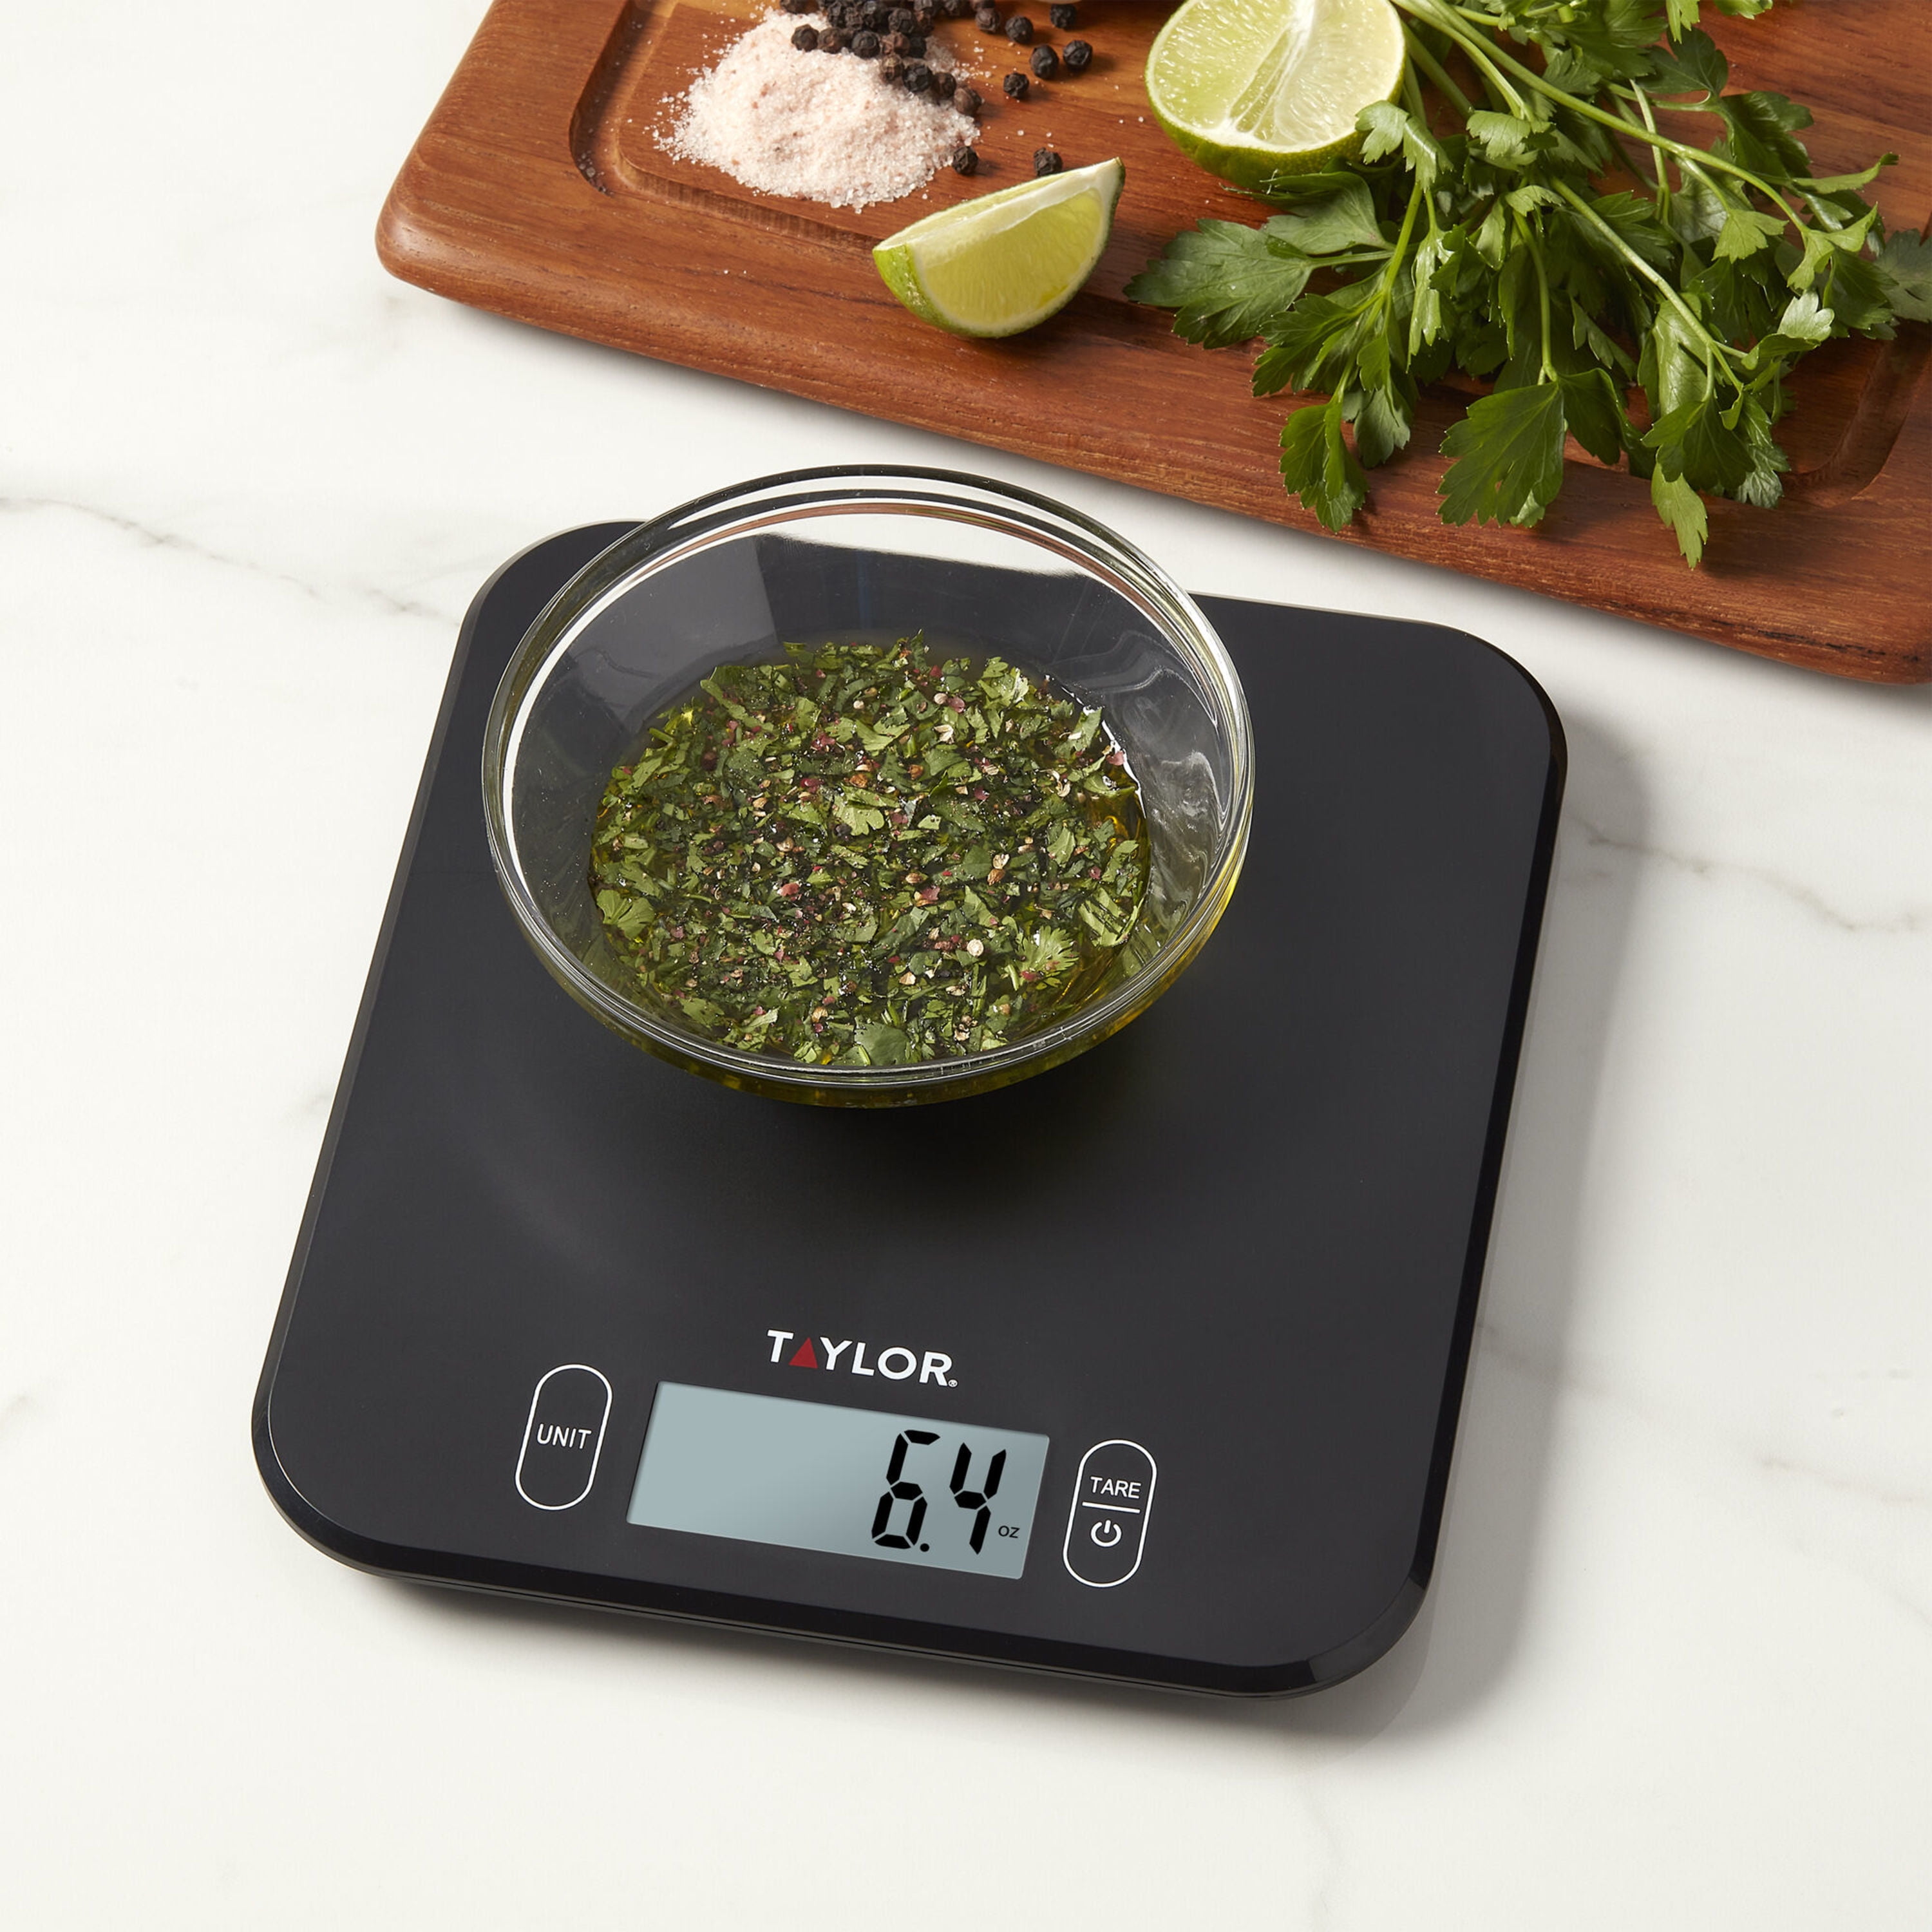 Taylor Modern Mechanical Kitchen Weighing Food Scale Weighs up to 11lbs,  Measures in Grams and Ounces, Black and Silver